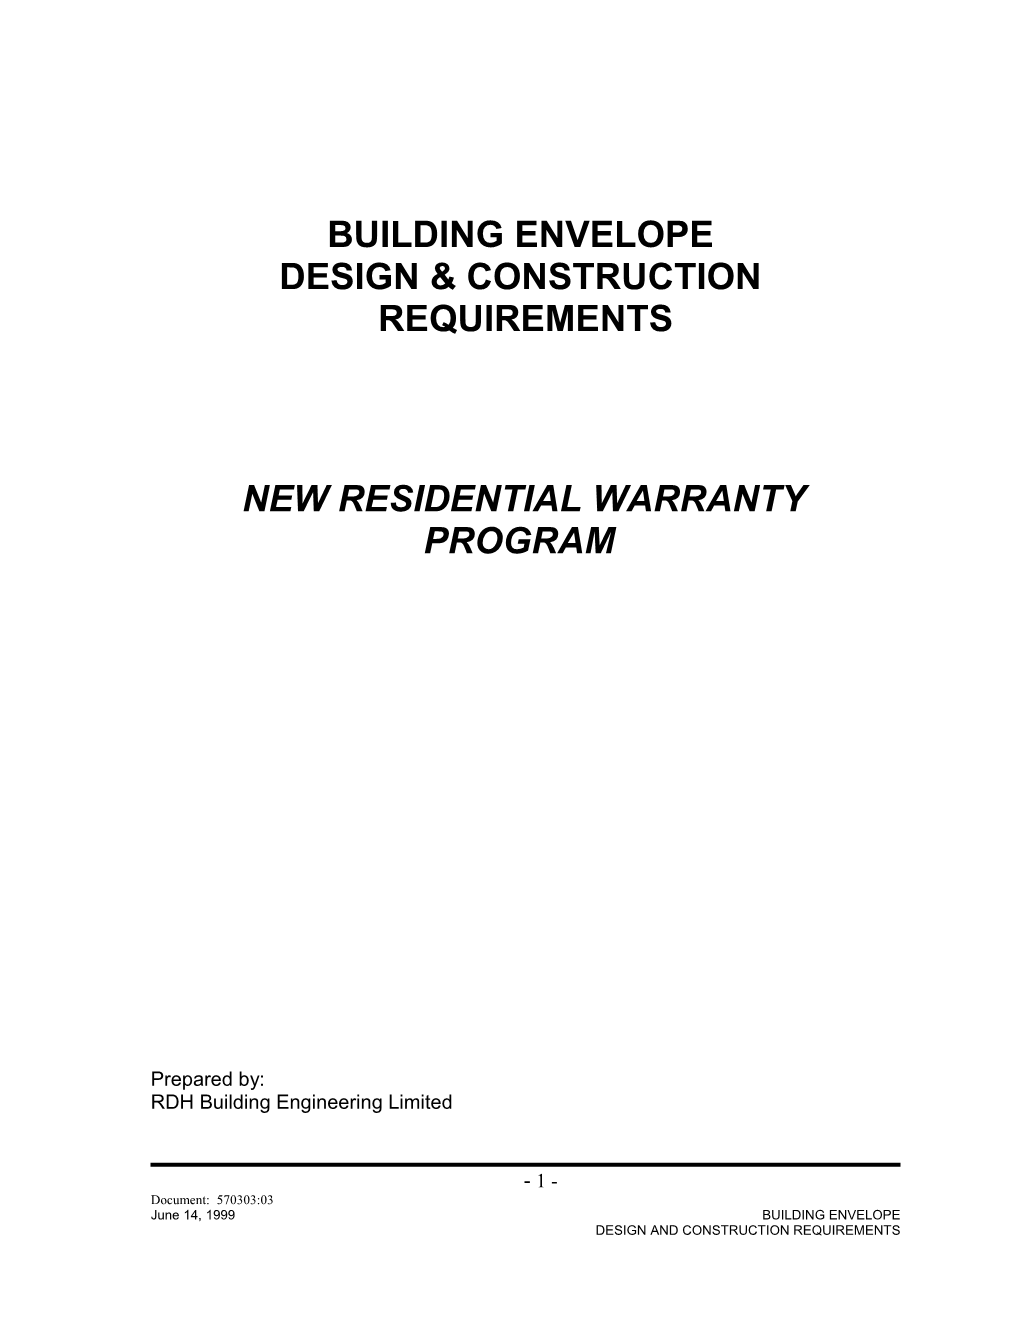 Building Envelope Design and Construction Manual